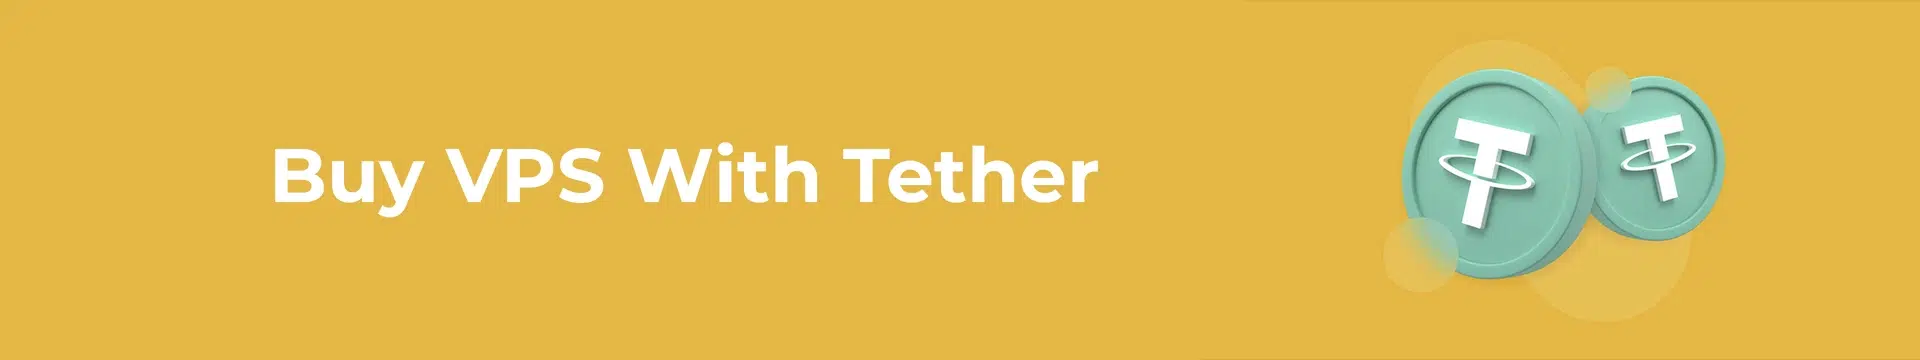 How To Buy VPS With Tether?